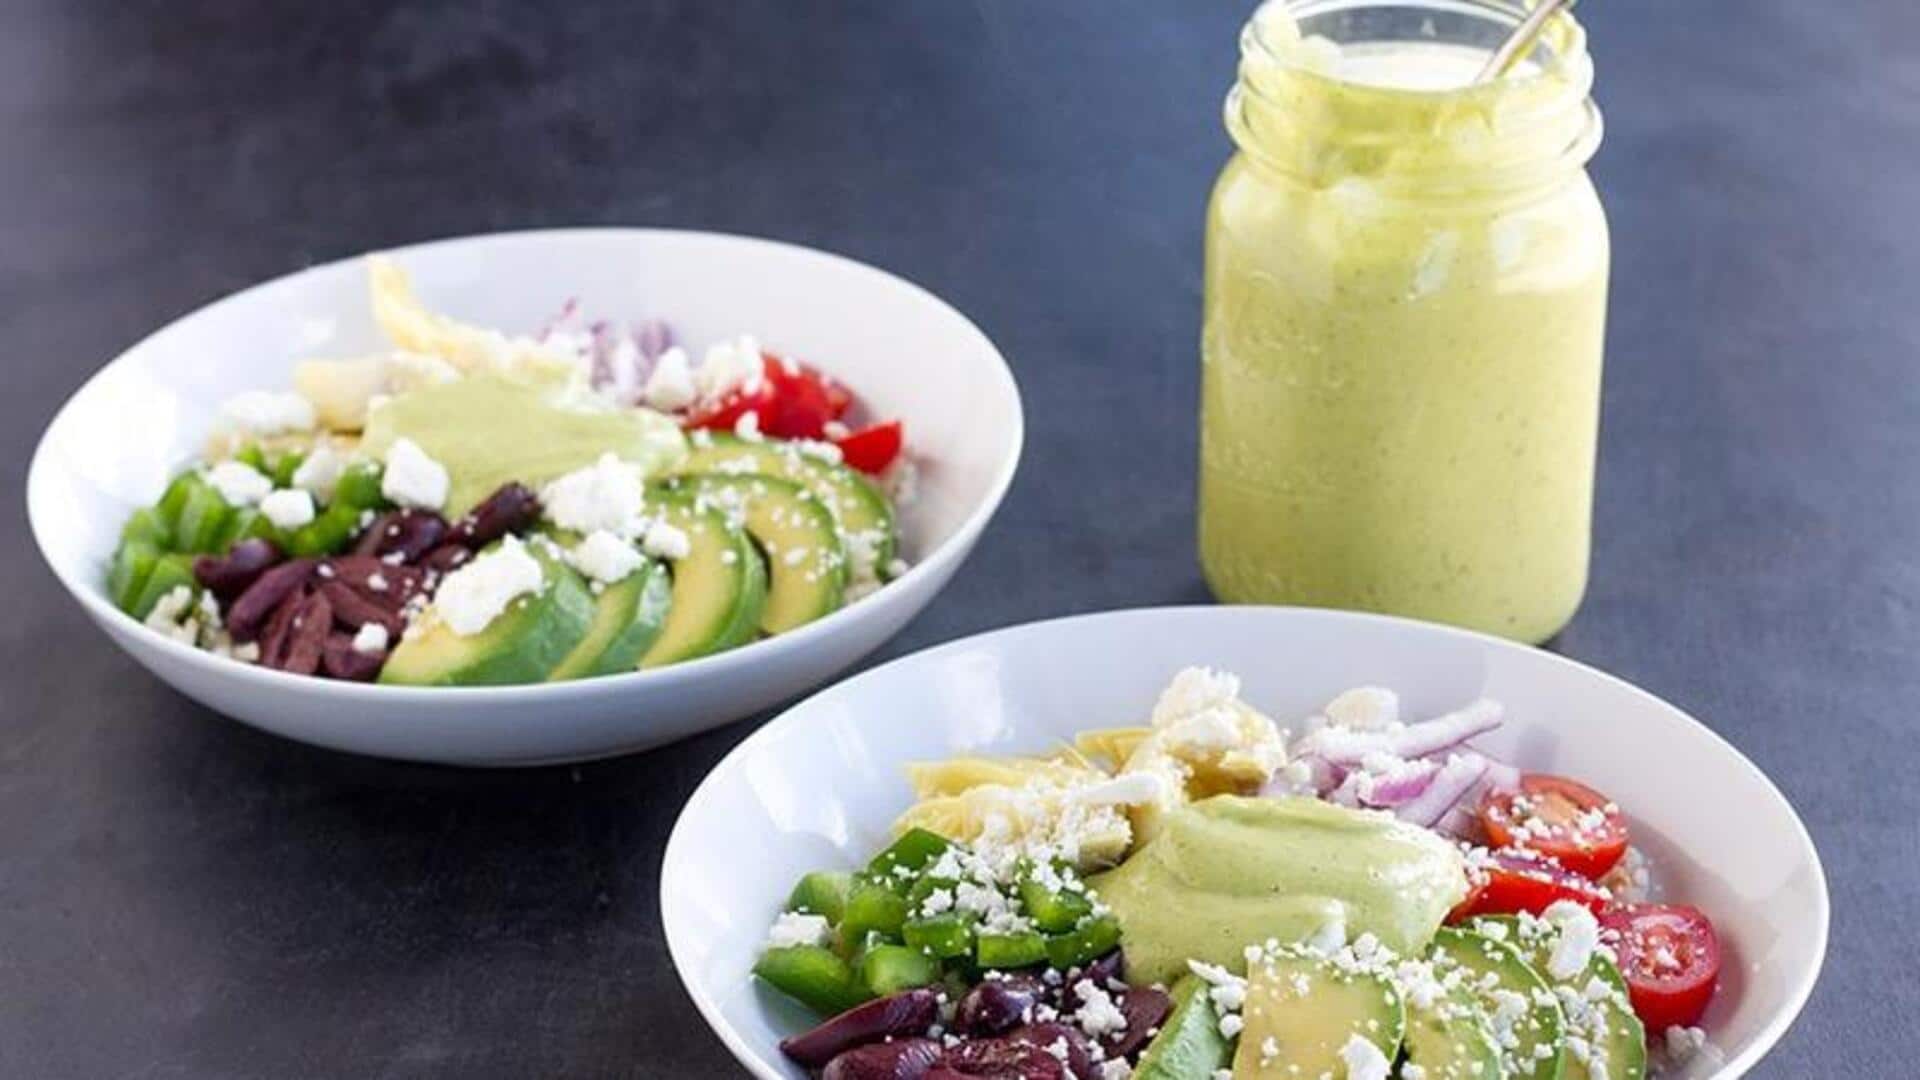 Make this avocado Greek salad at home. Here's the recipe